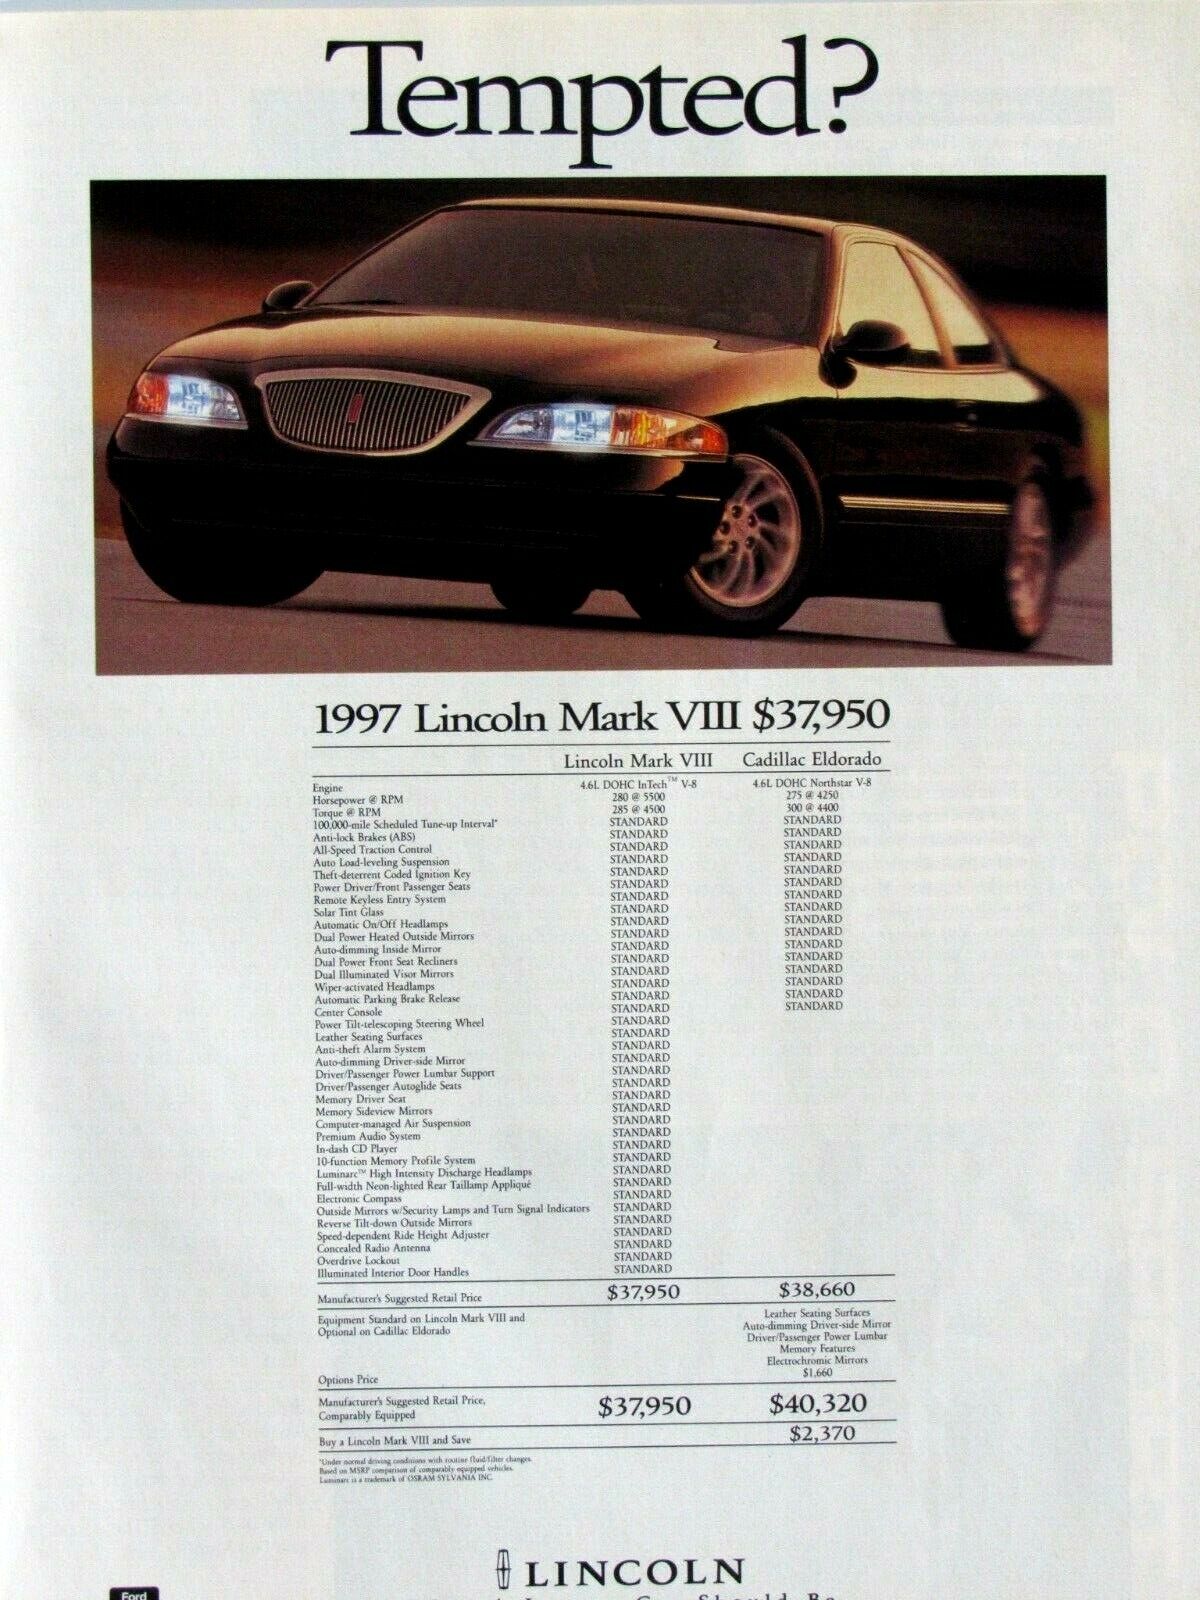 1997 Lincoln Continental Vintage Tempted Original Print Ad 8.5 x 11\